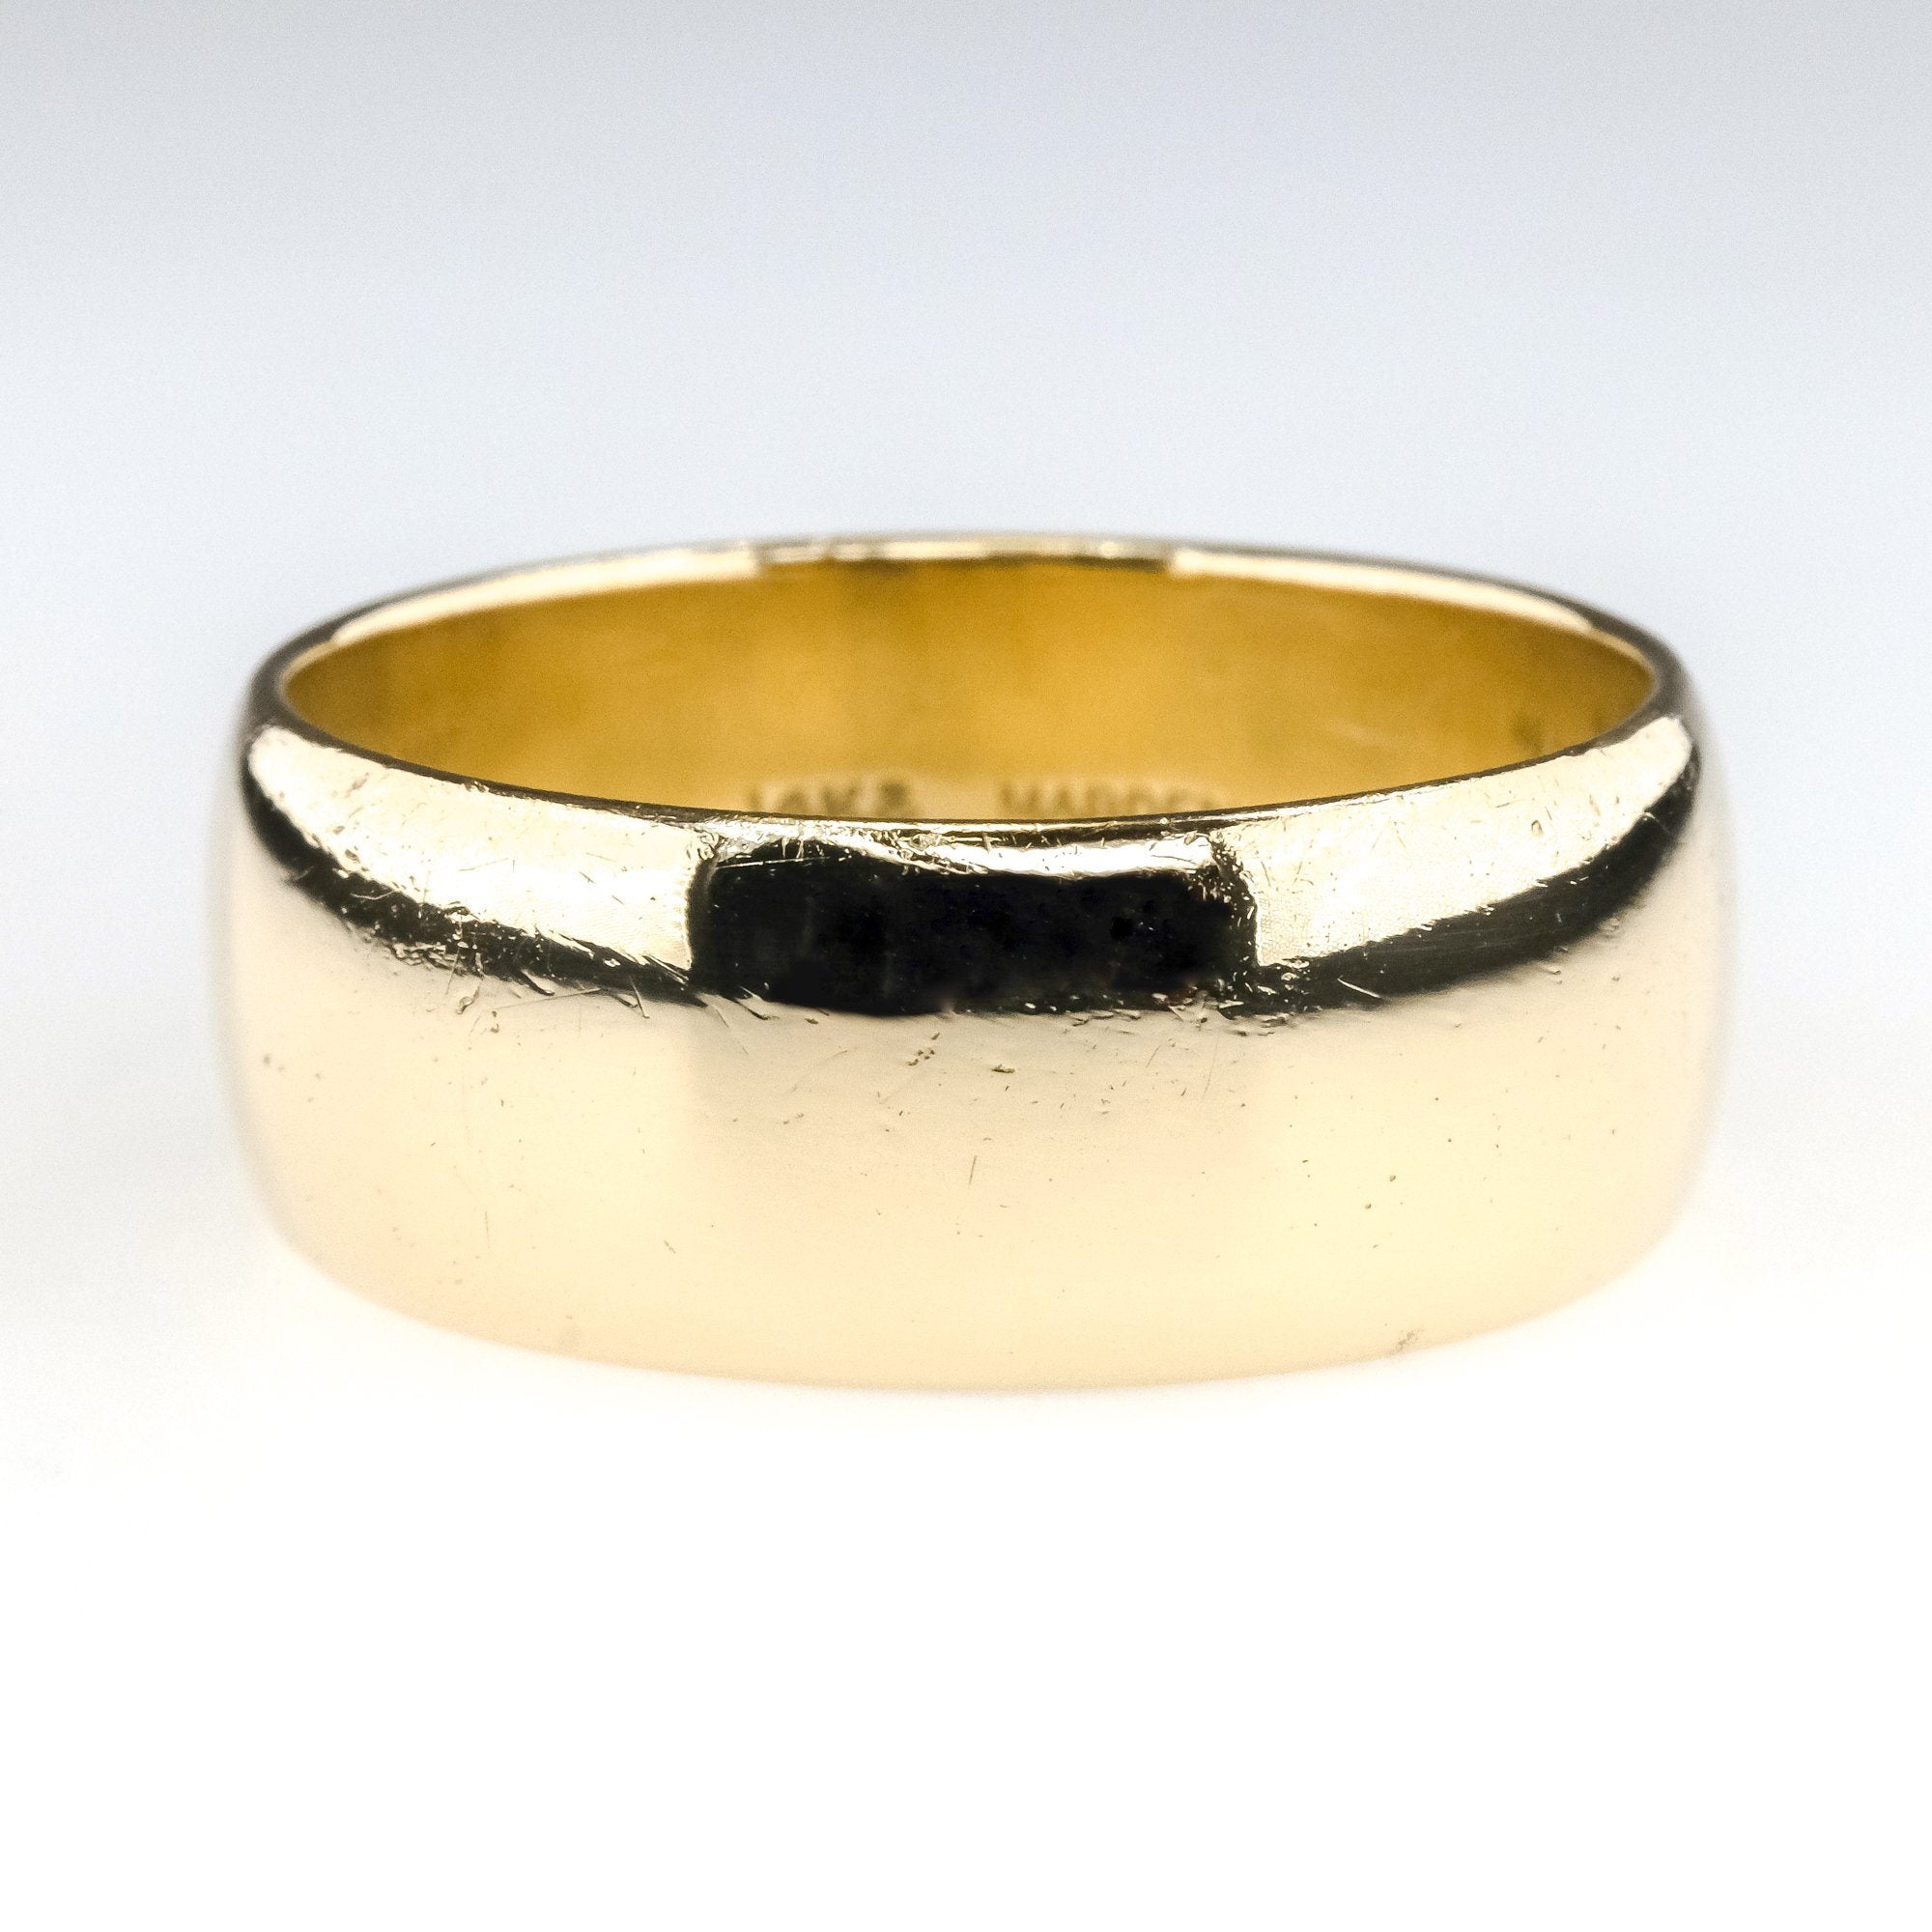 Round Wedding Band, Solid Gold